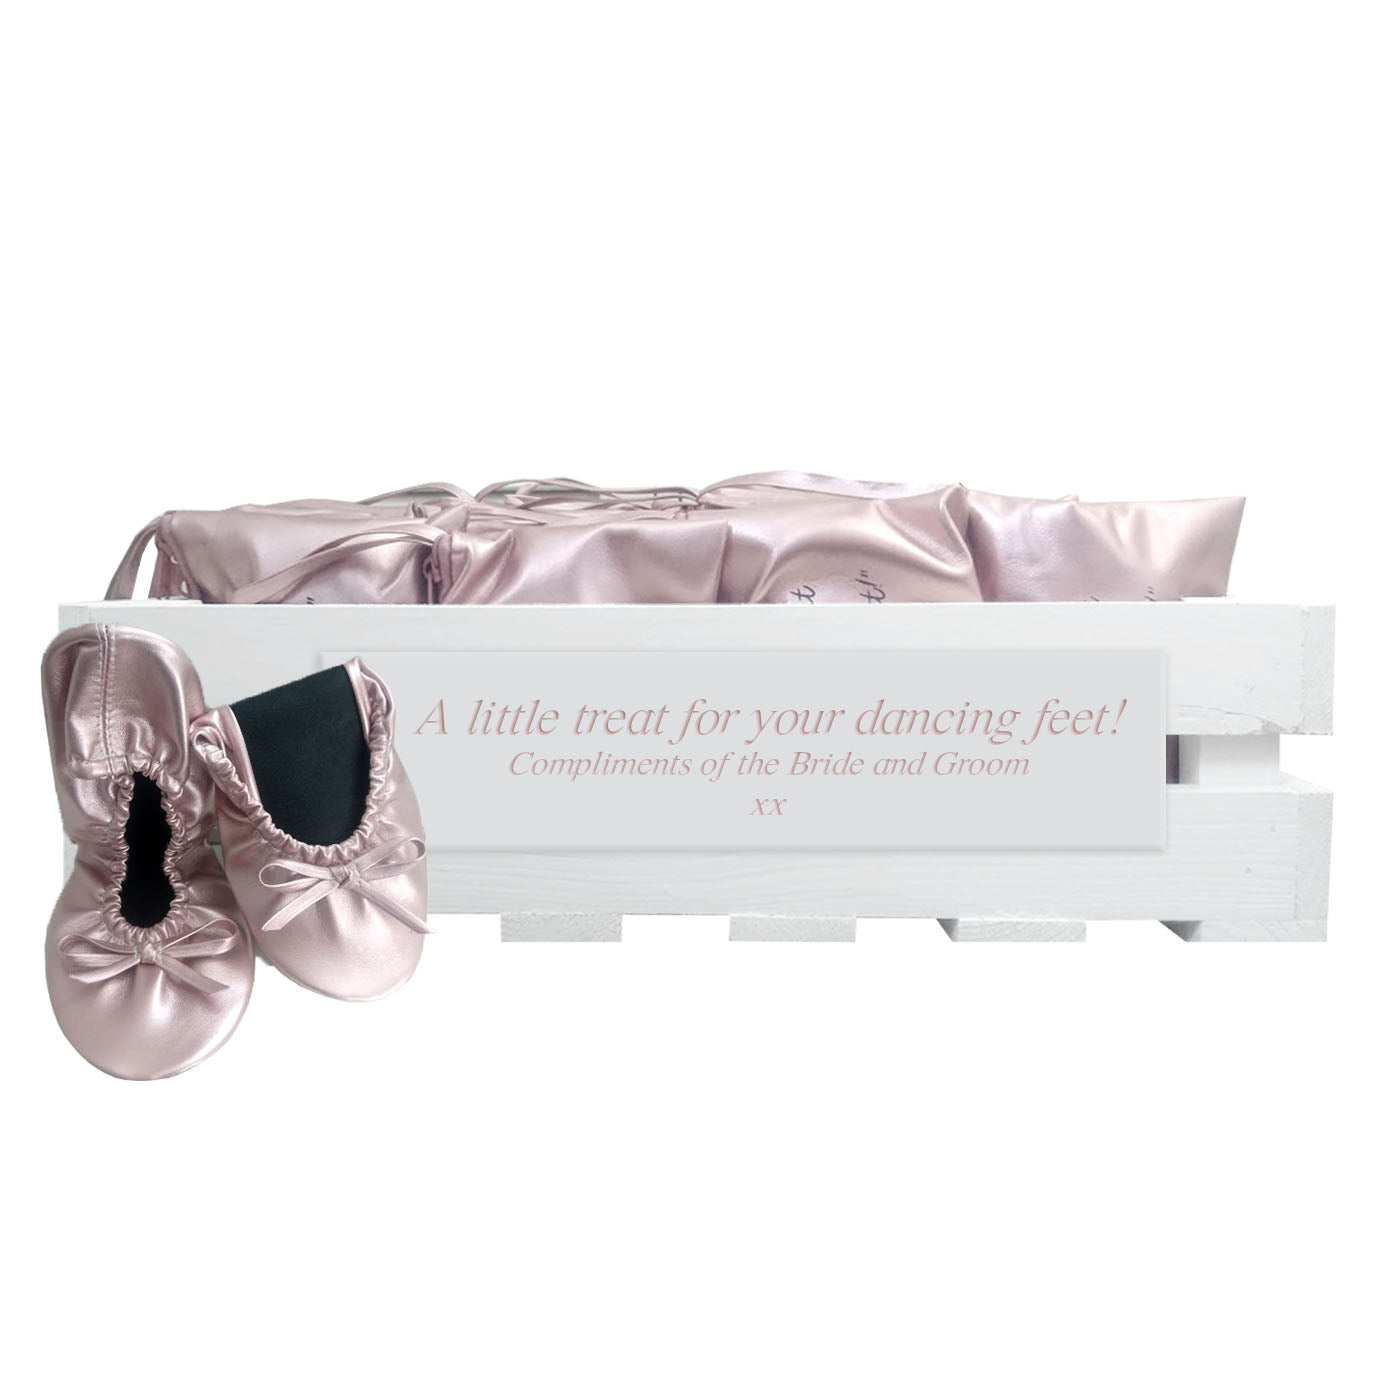 30 pairs of rose gold fold-up ballerinas in a personalized crate